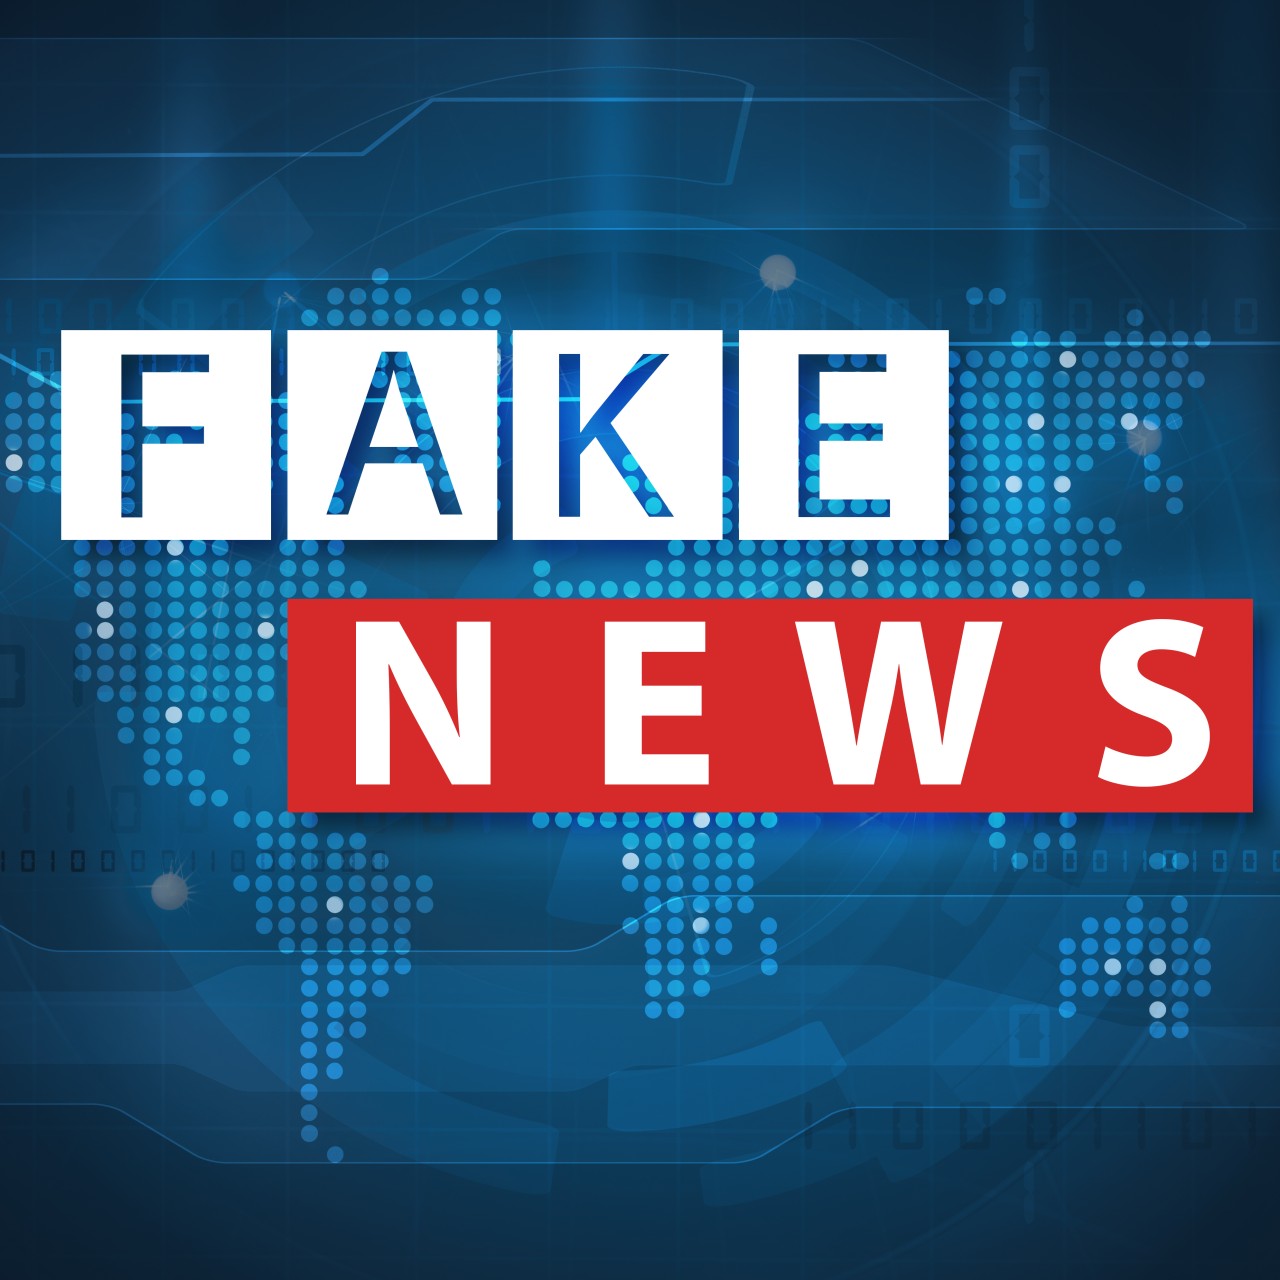 Question 5: What makes you think that a news item is fake? You can mark